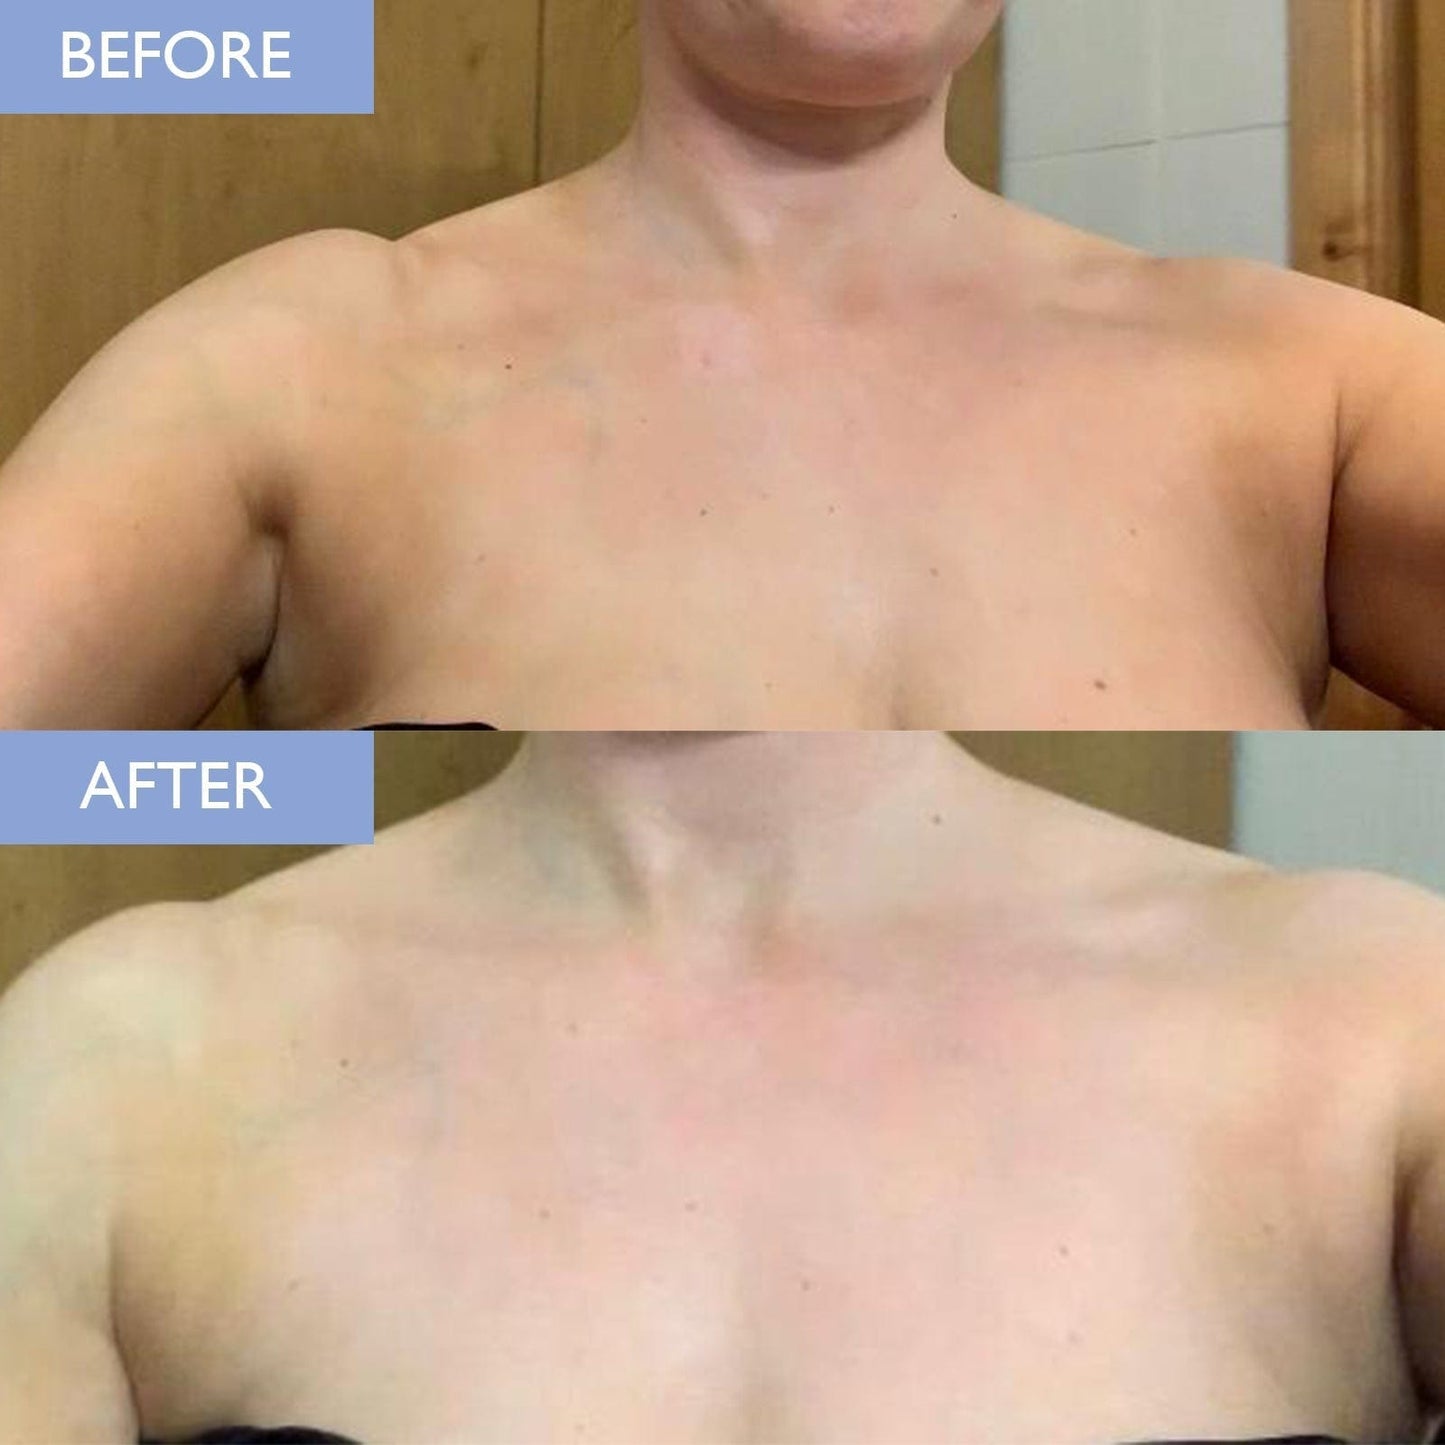 Image showing a before and after using exfoliating body scrub on the chest area.  Clearer, brighter skin is displayed.